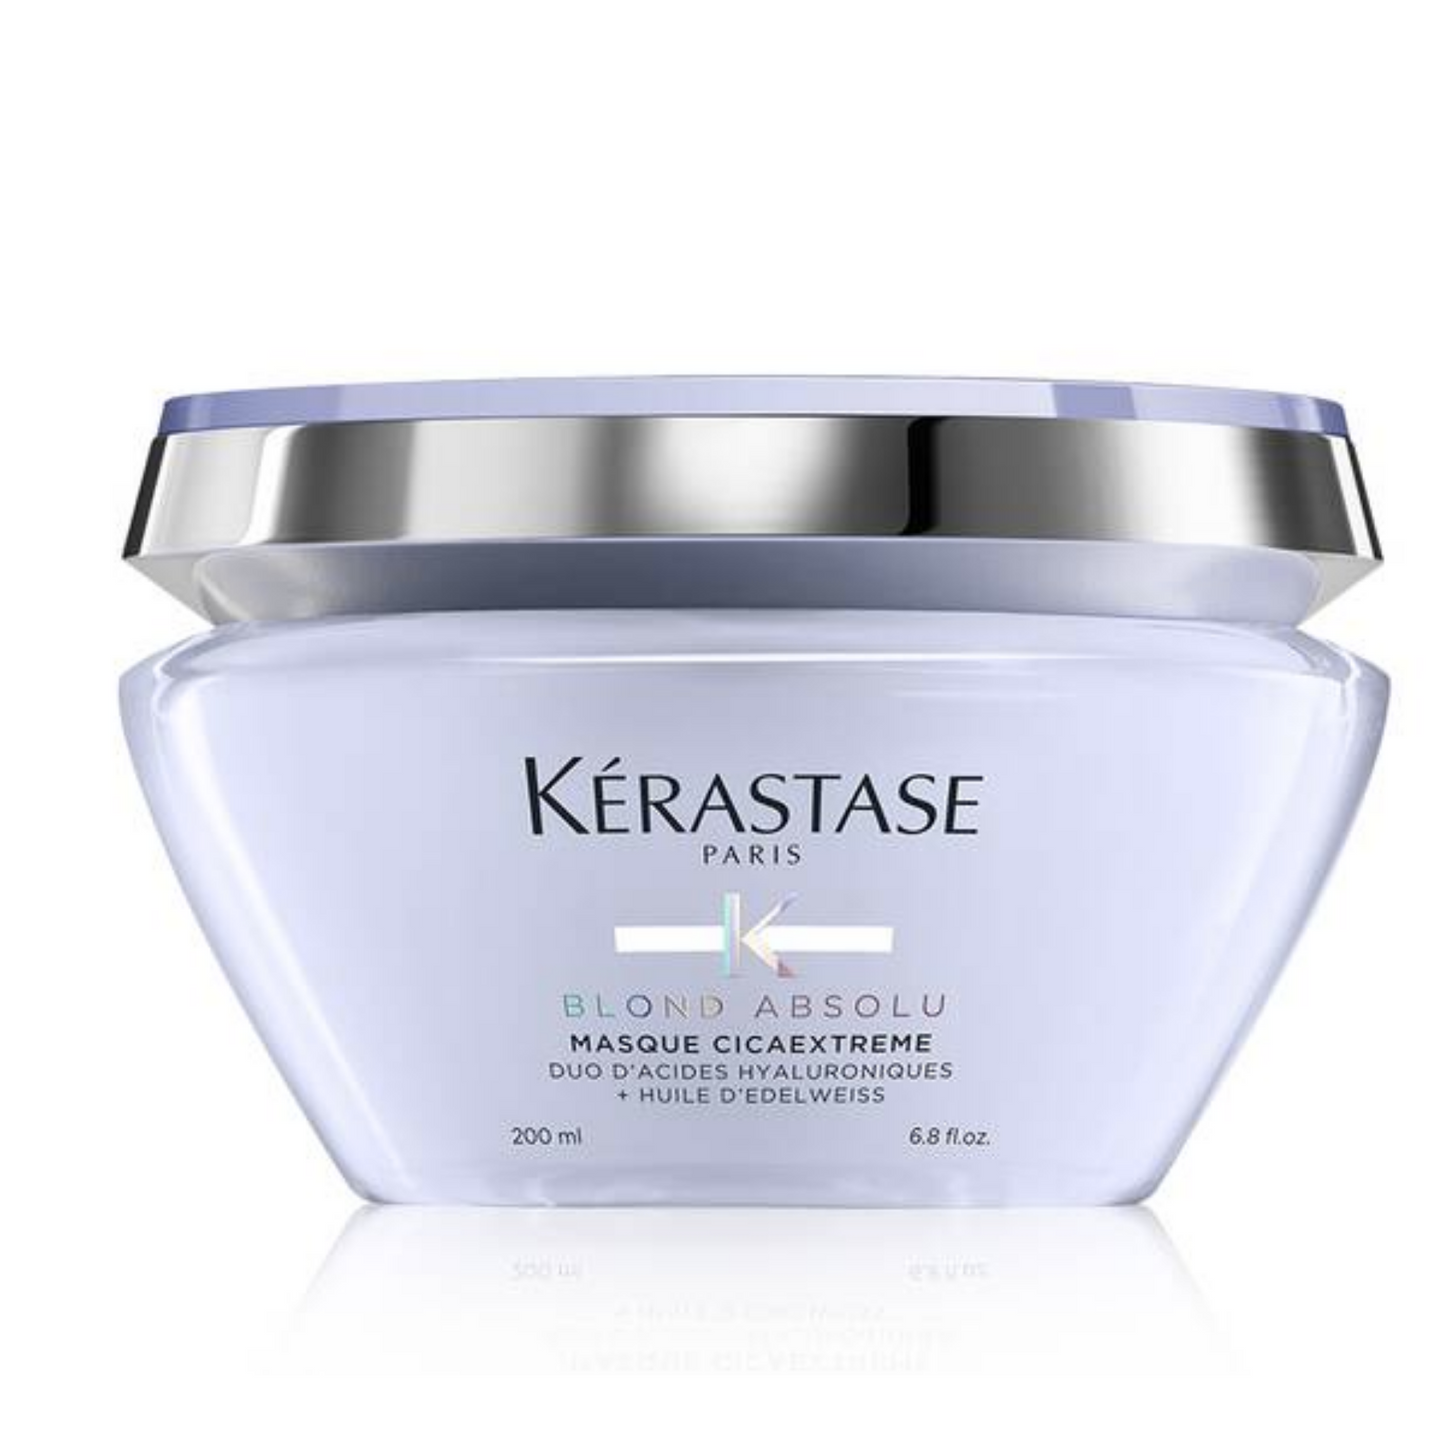 Masque Cicaextreme Hair Mask - Intense conditioning post-bleaching procedure hair mask for sensitized lightened or highlighted hair.